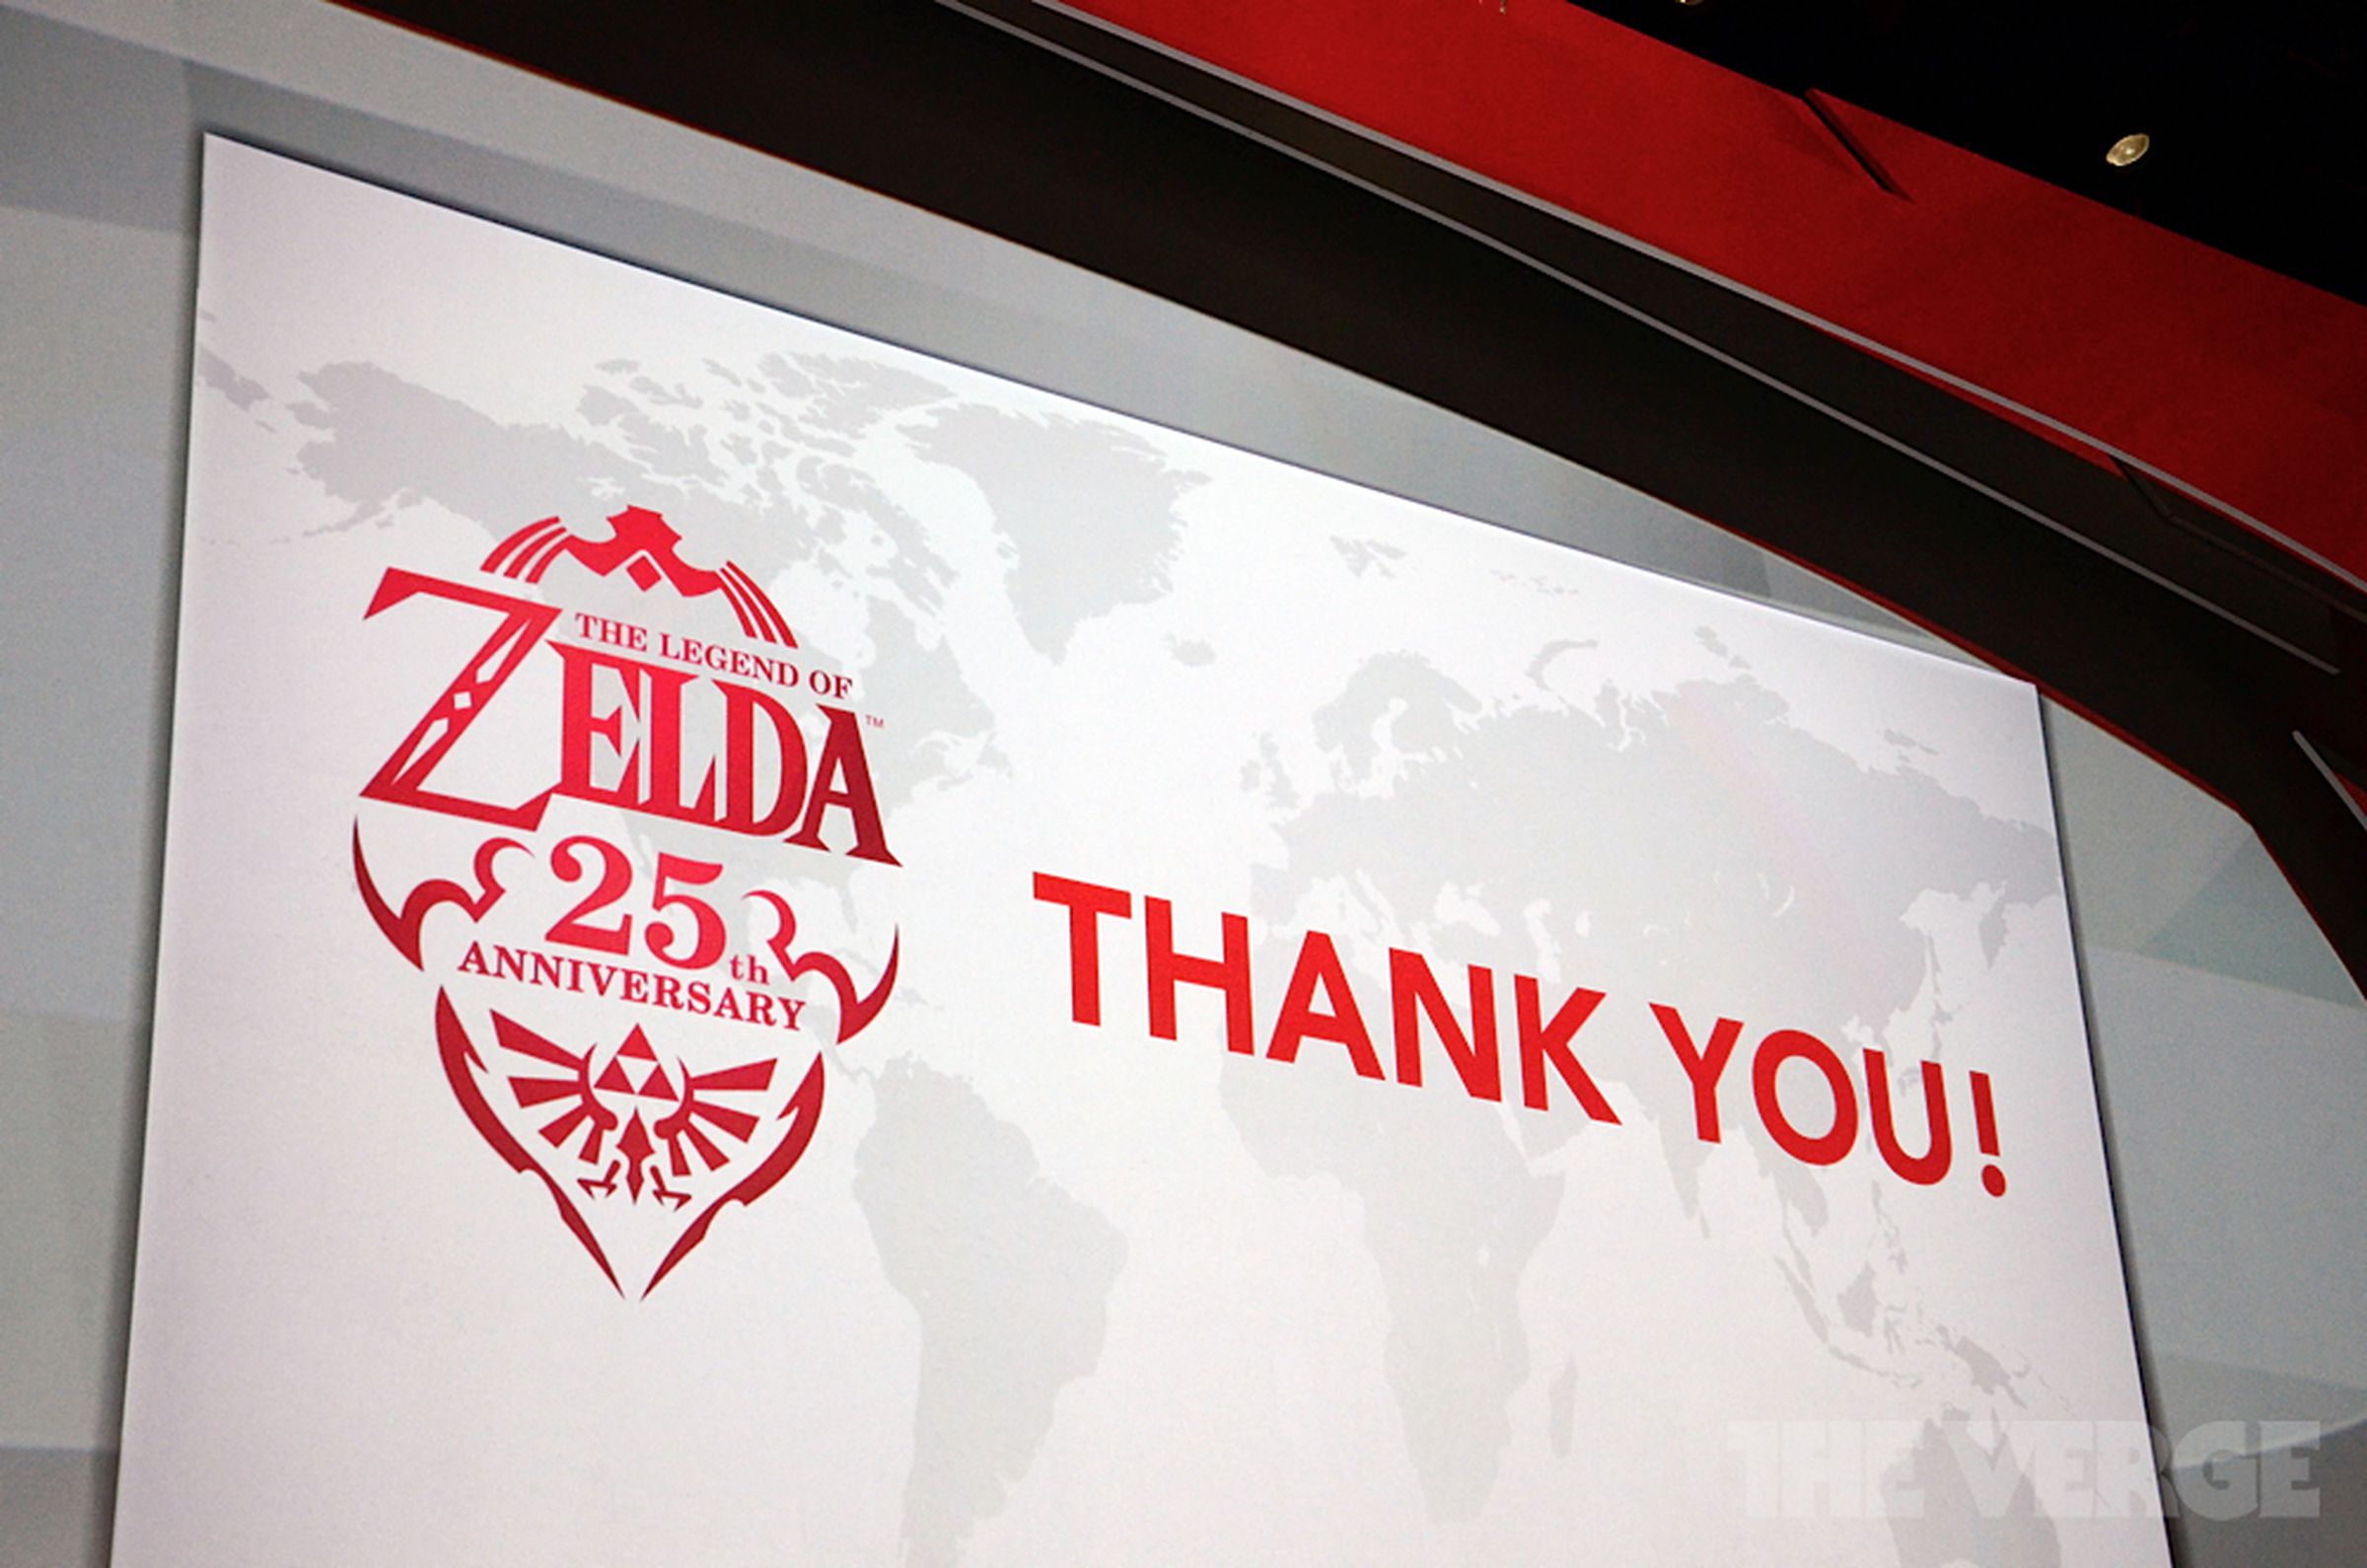 Nintendo's E3 2011 keynote in pictures